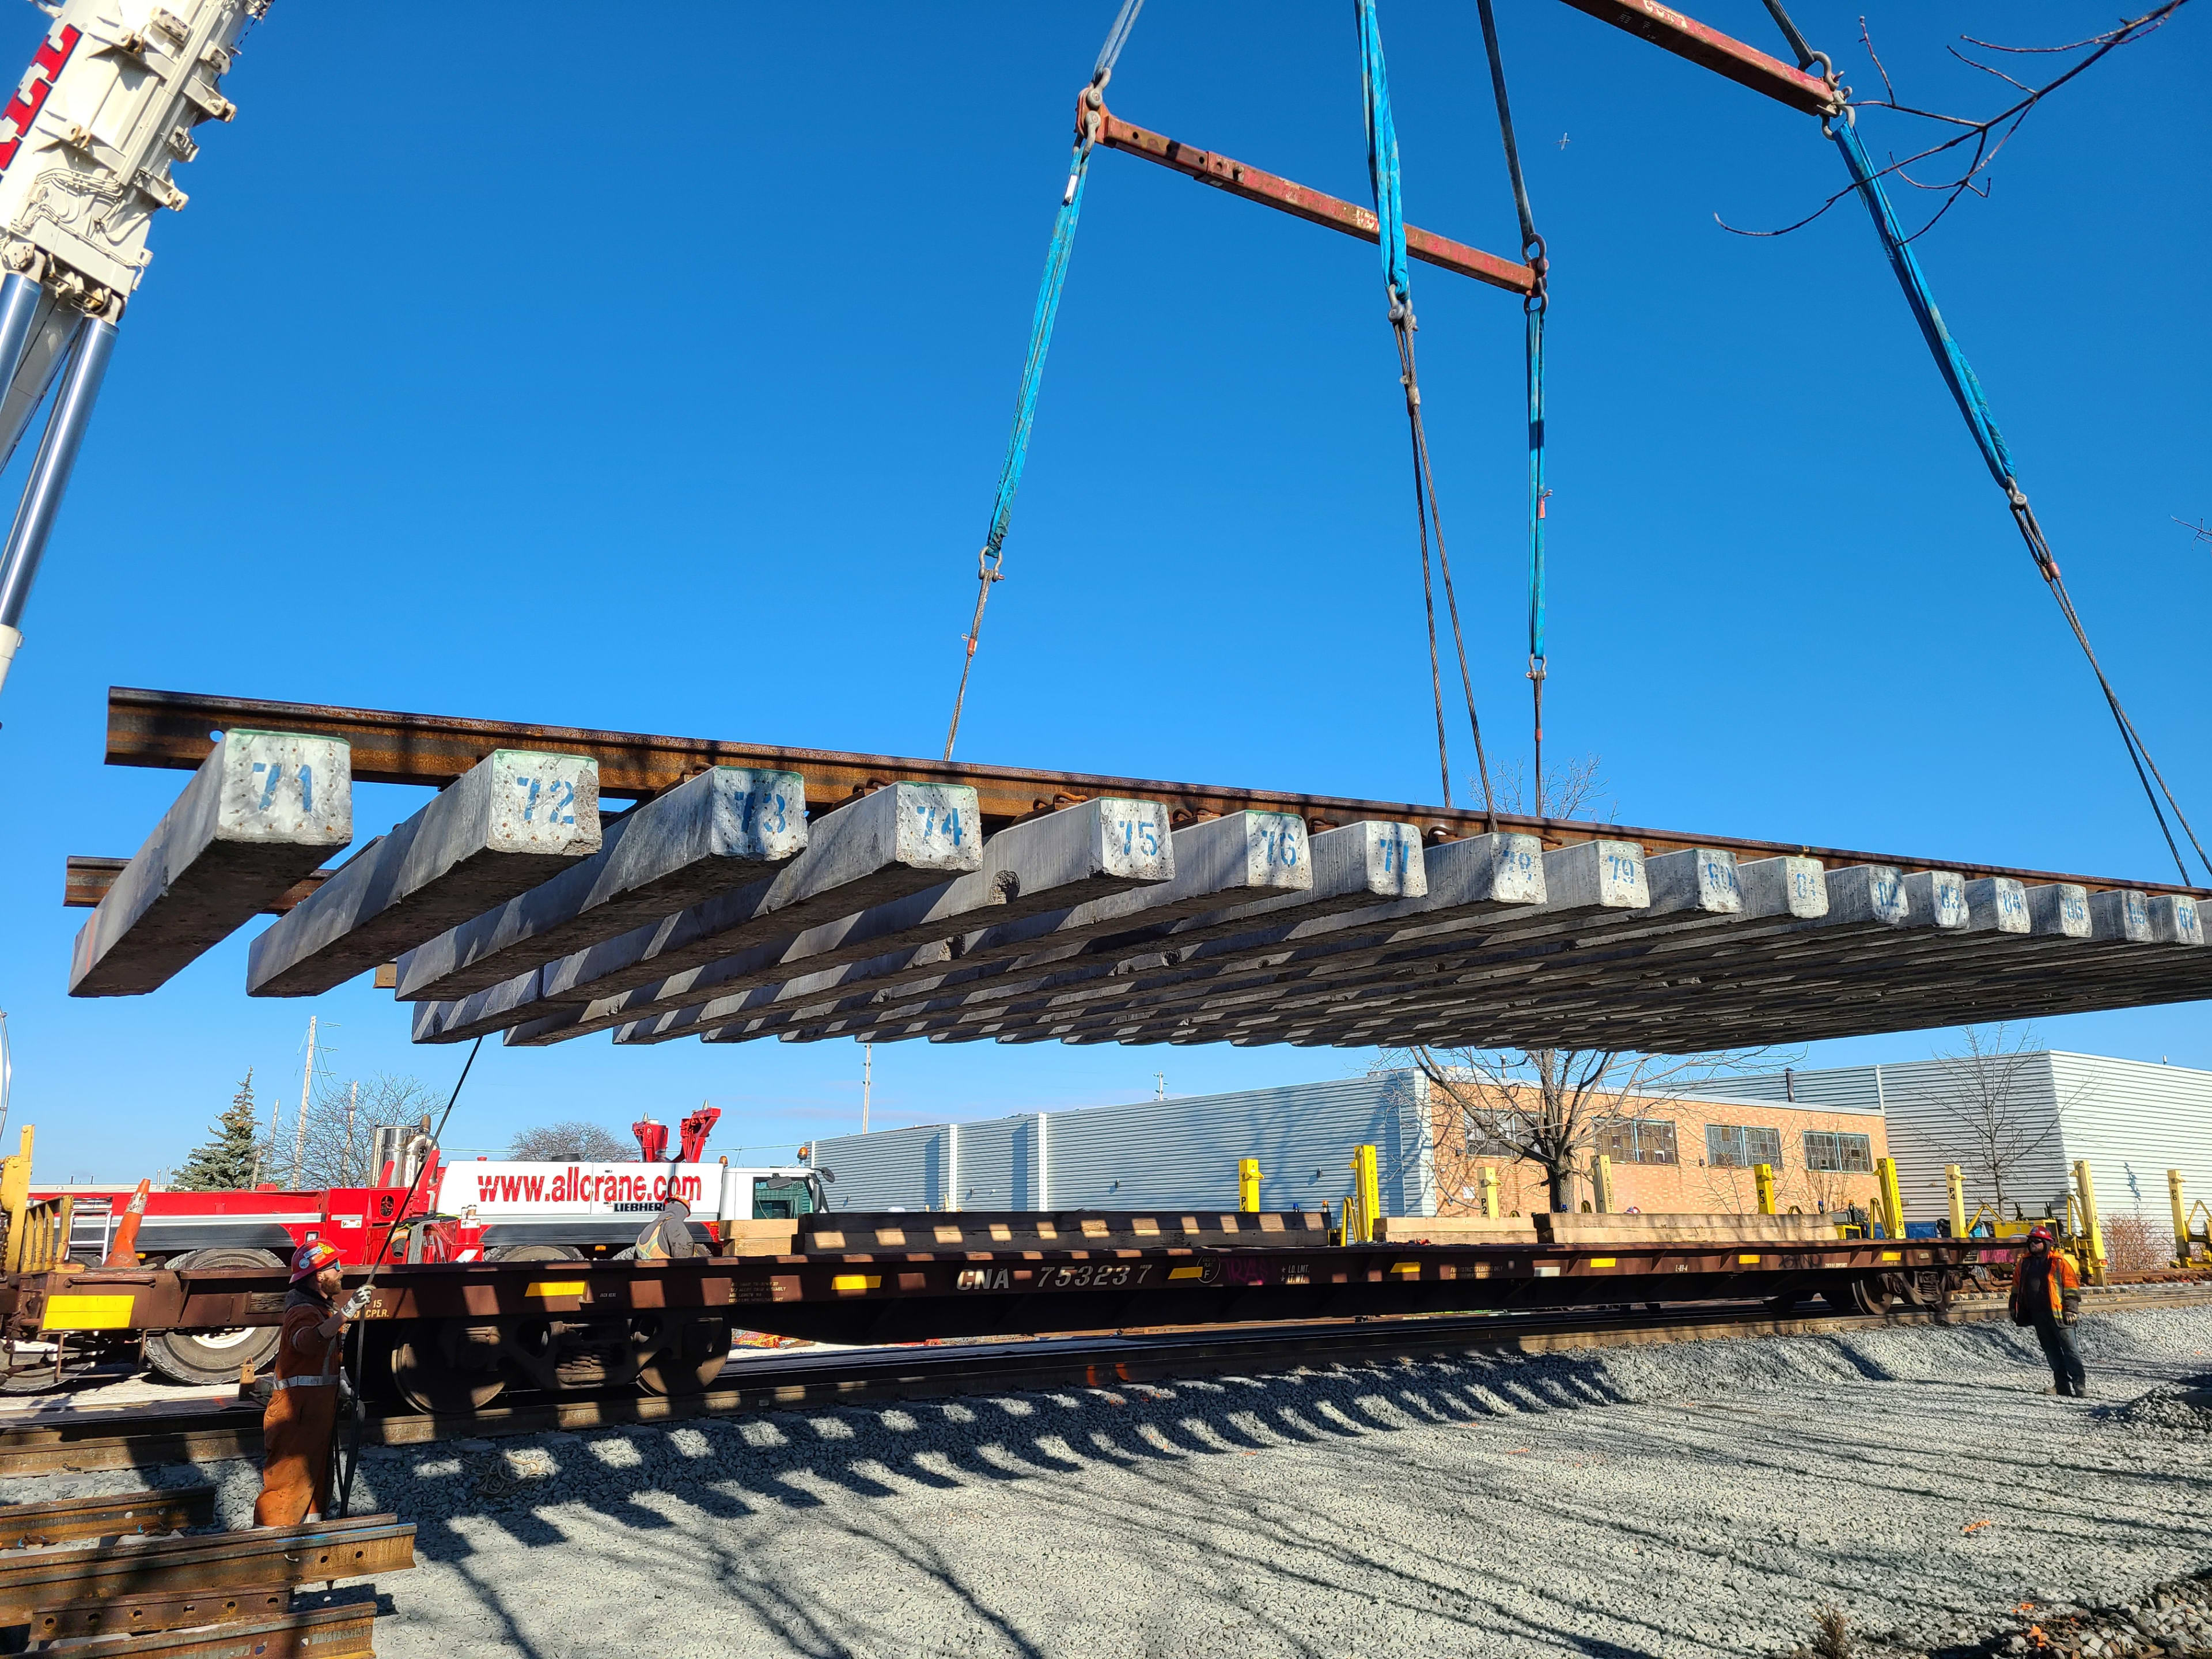 A large piece of track with concrete rail ties is lowered into place by a crane